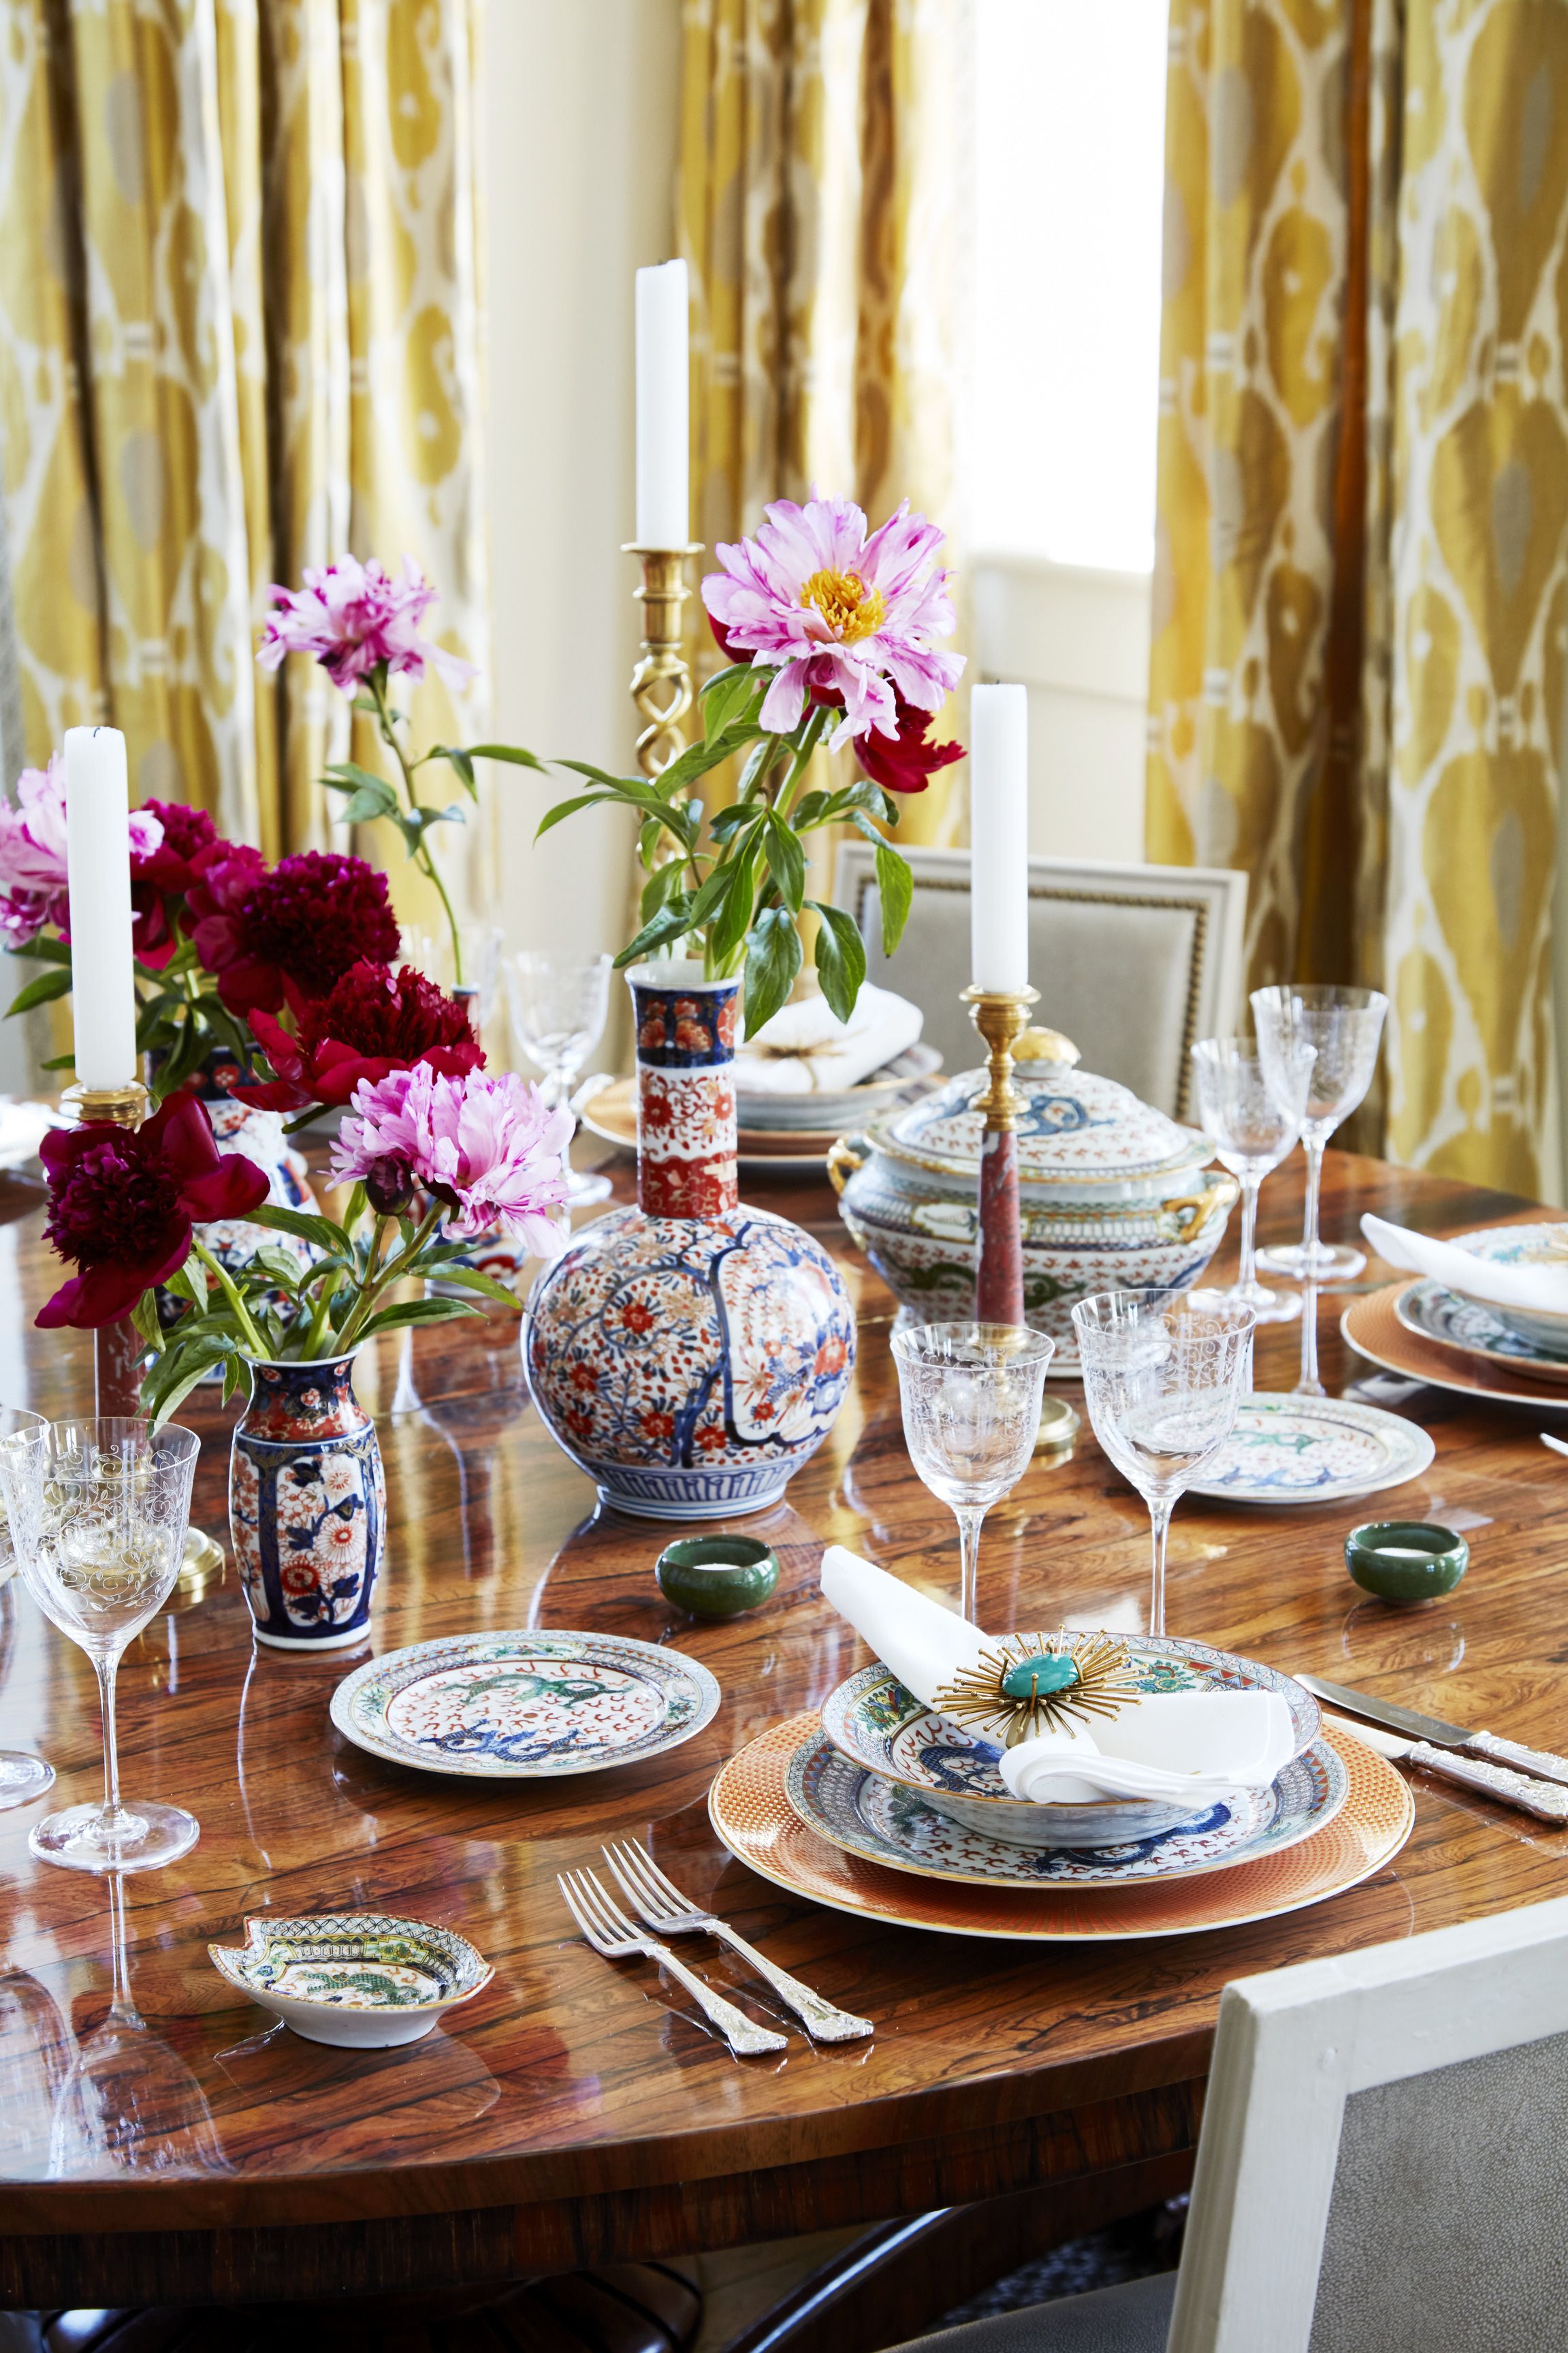 Summer table decor ideas – 10 beautiful ways to dine in style